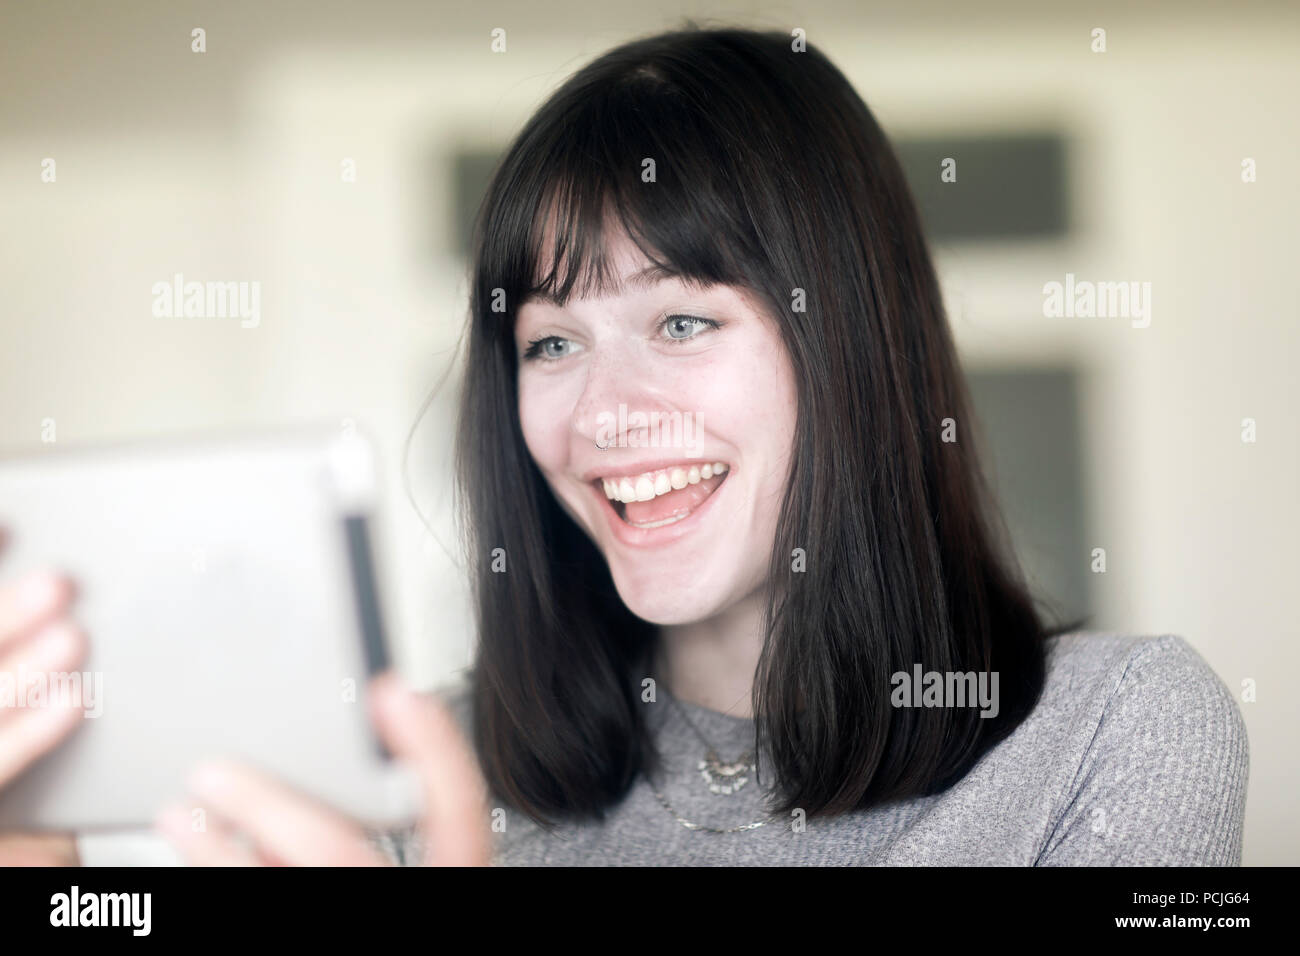 Portrait of a smiling woman looking at a digital tablet Banque D'Images